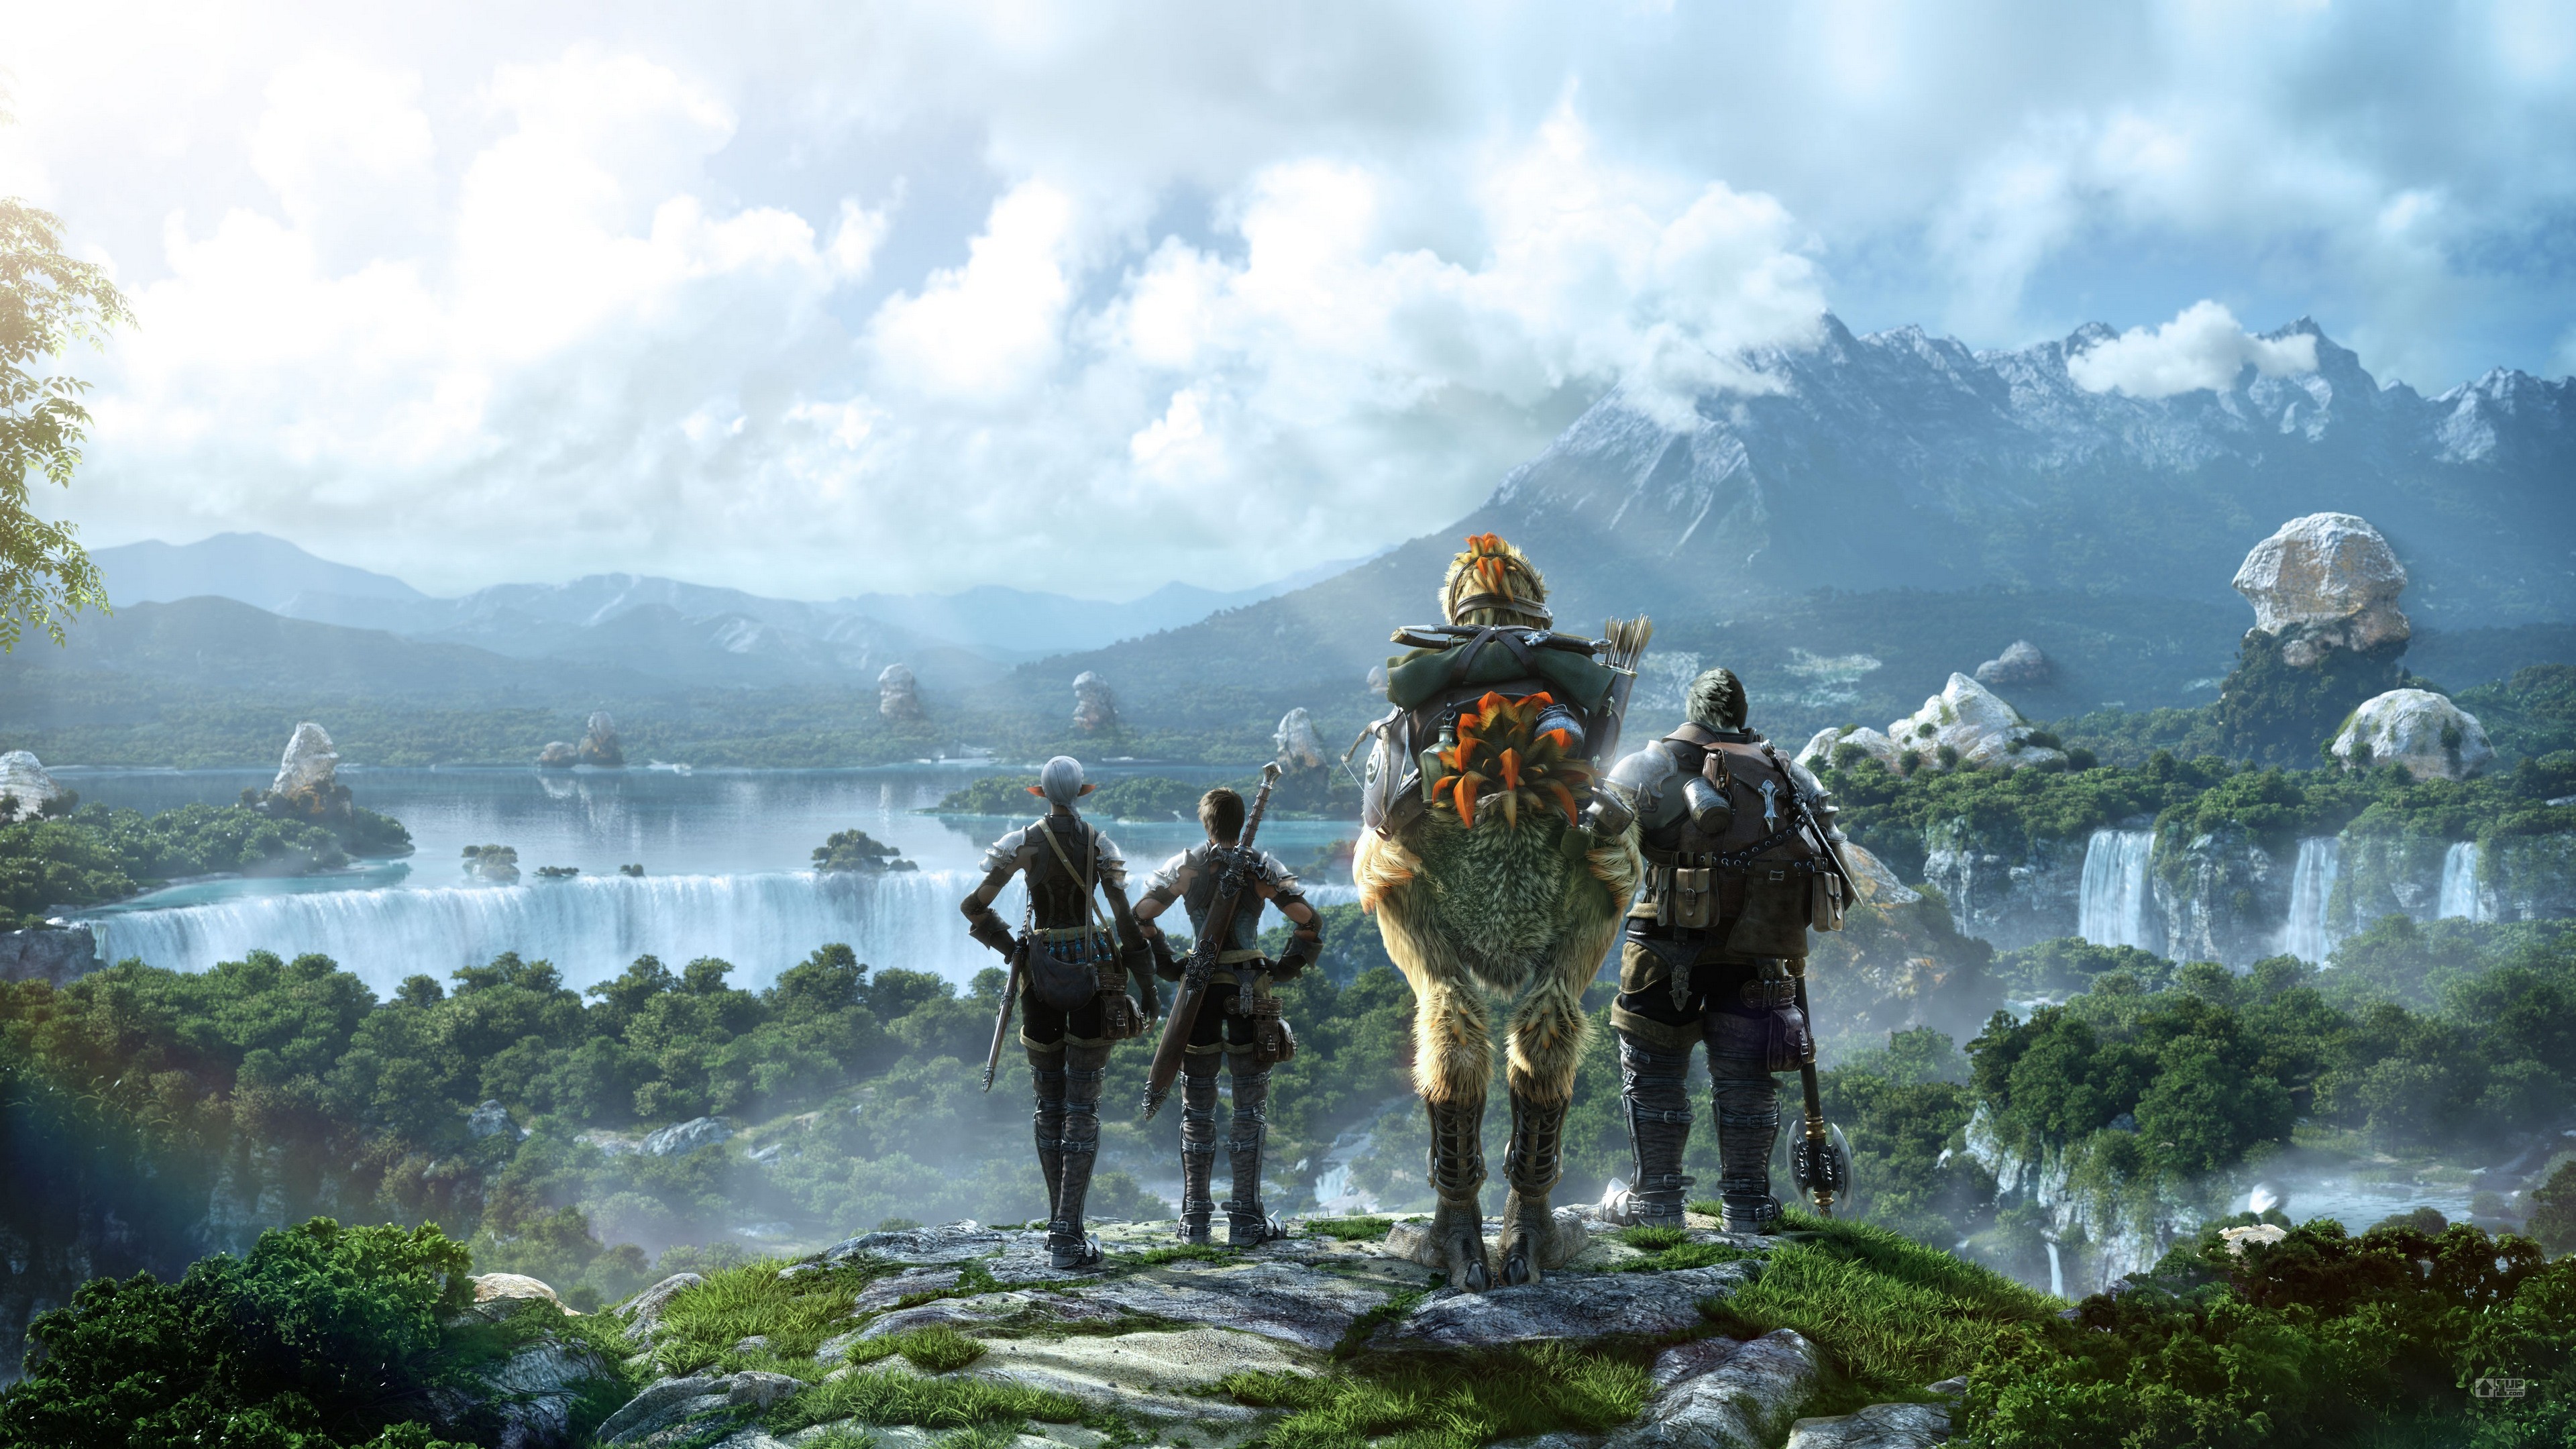 General 3840x2160 Final Fantasy XIV: A Realm Reborn Final Fantasy looking into the distance mountains waterfall sky video games digital art fantasy art Chocobo video game art